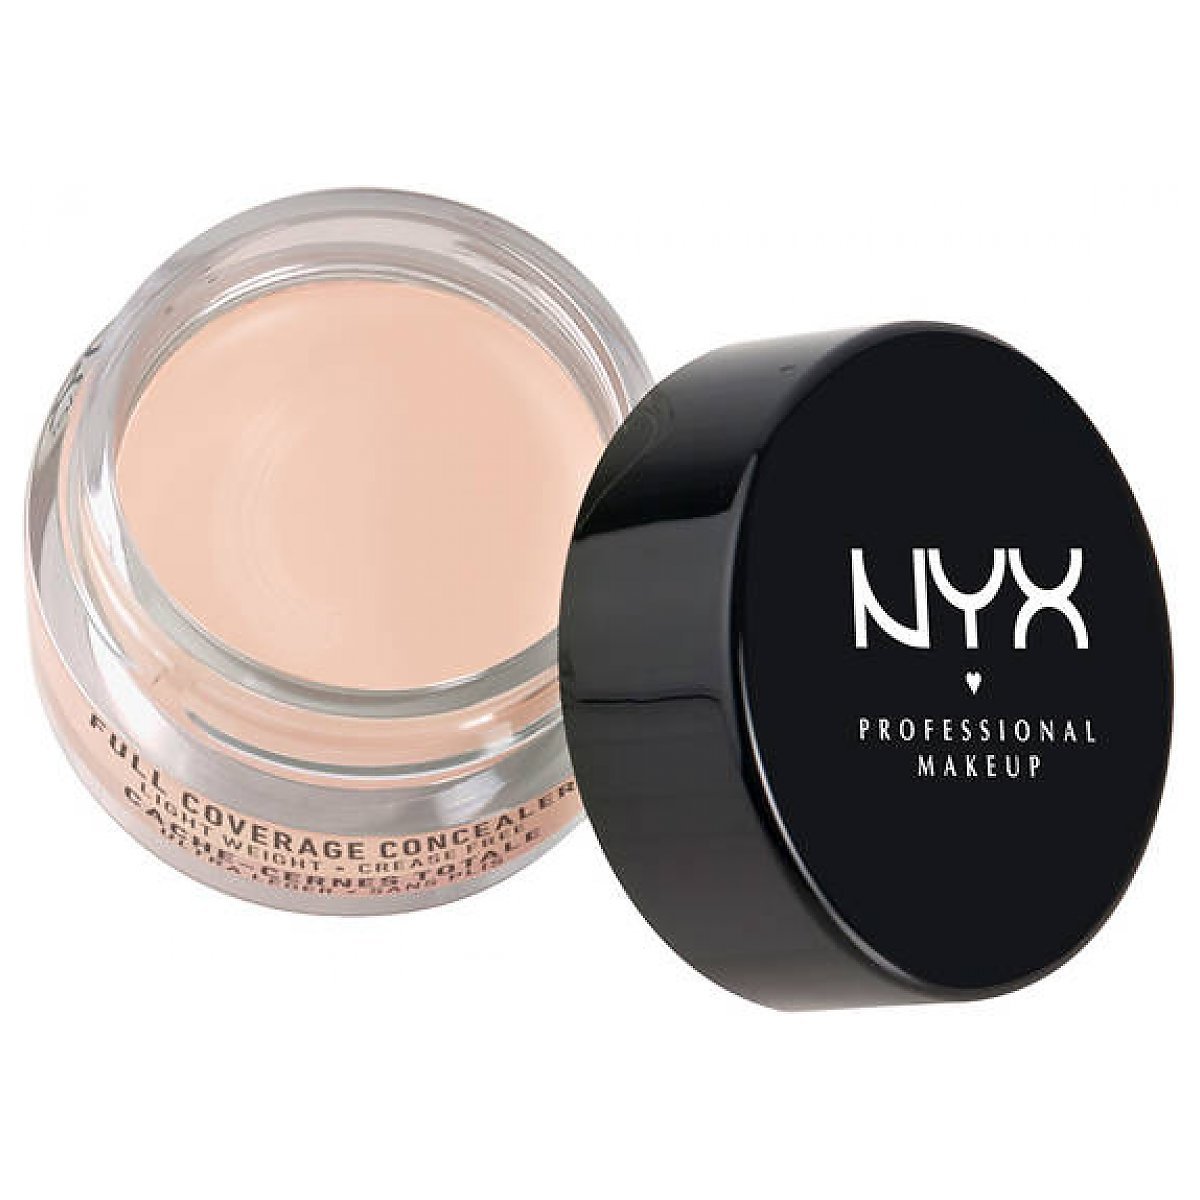 nyx coverage concealer review